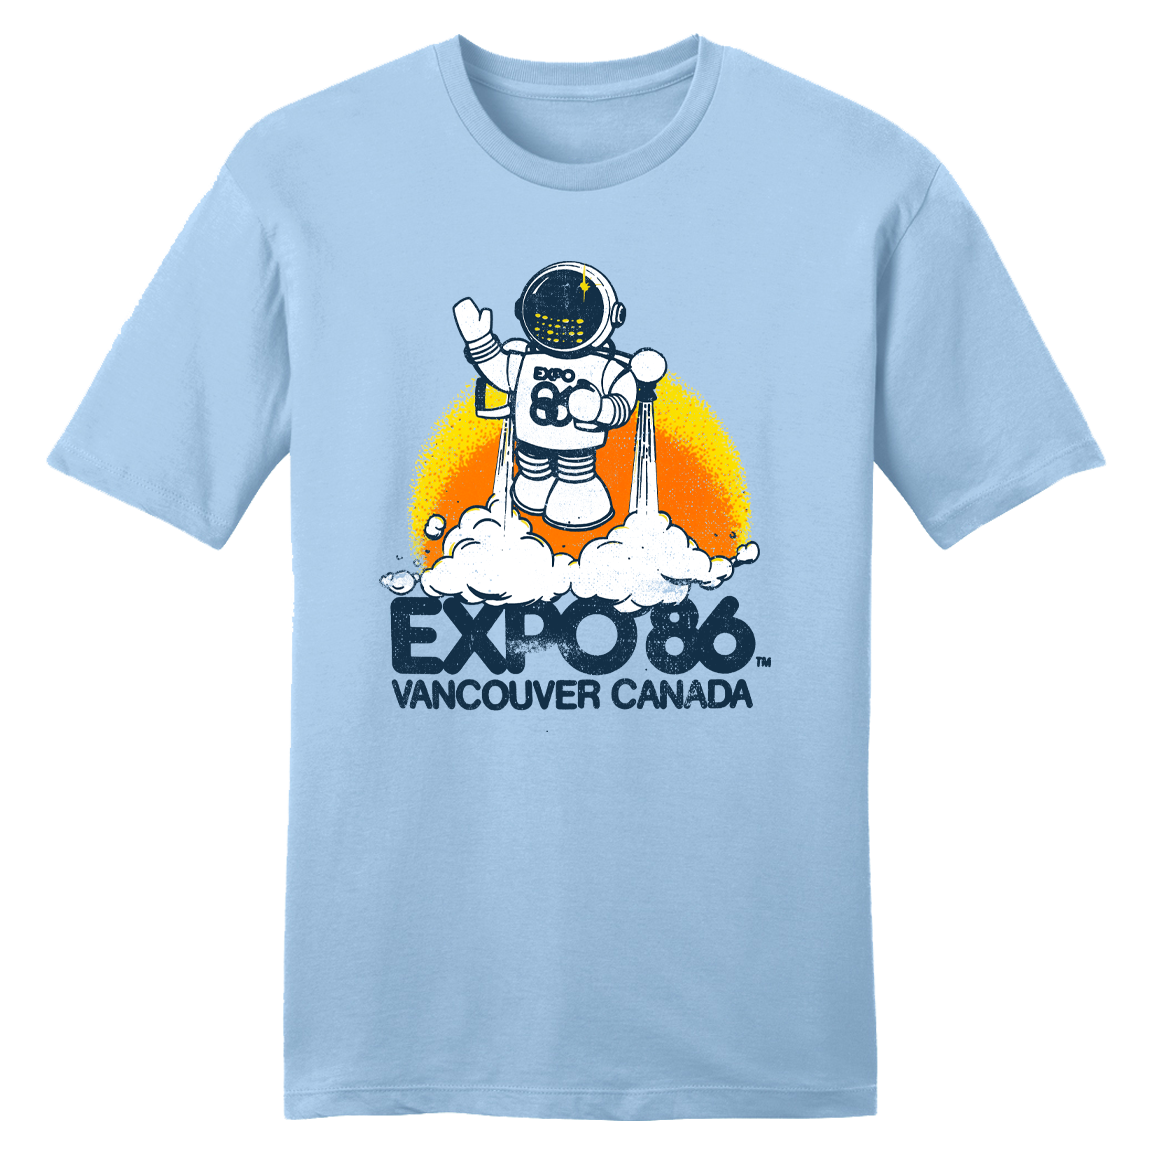 Expo '86 Vancouver light blue tee